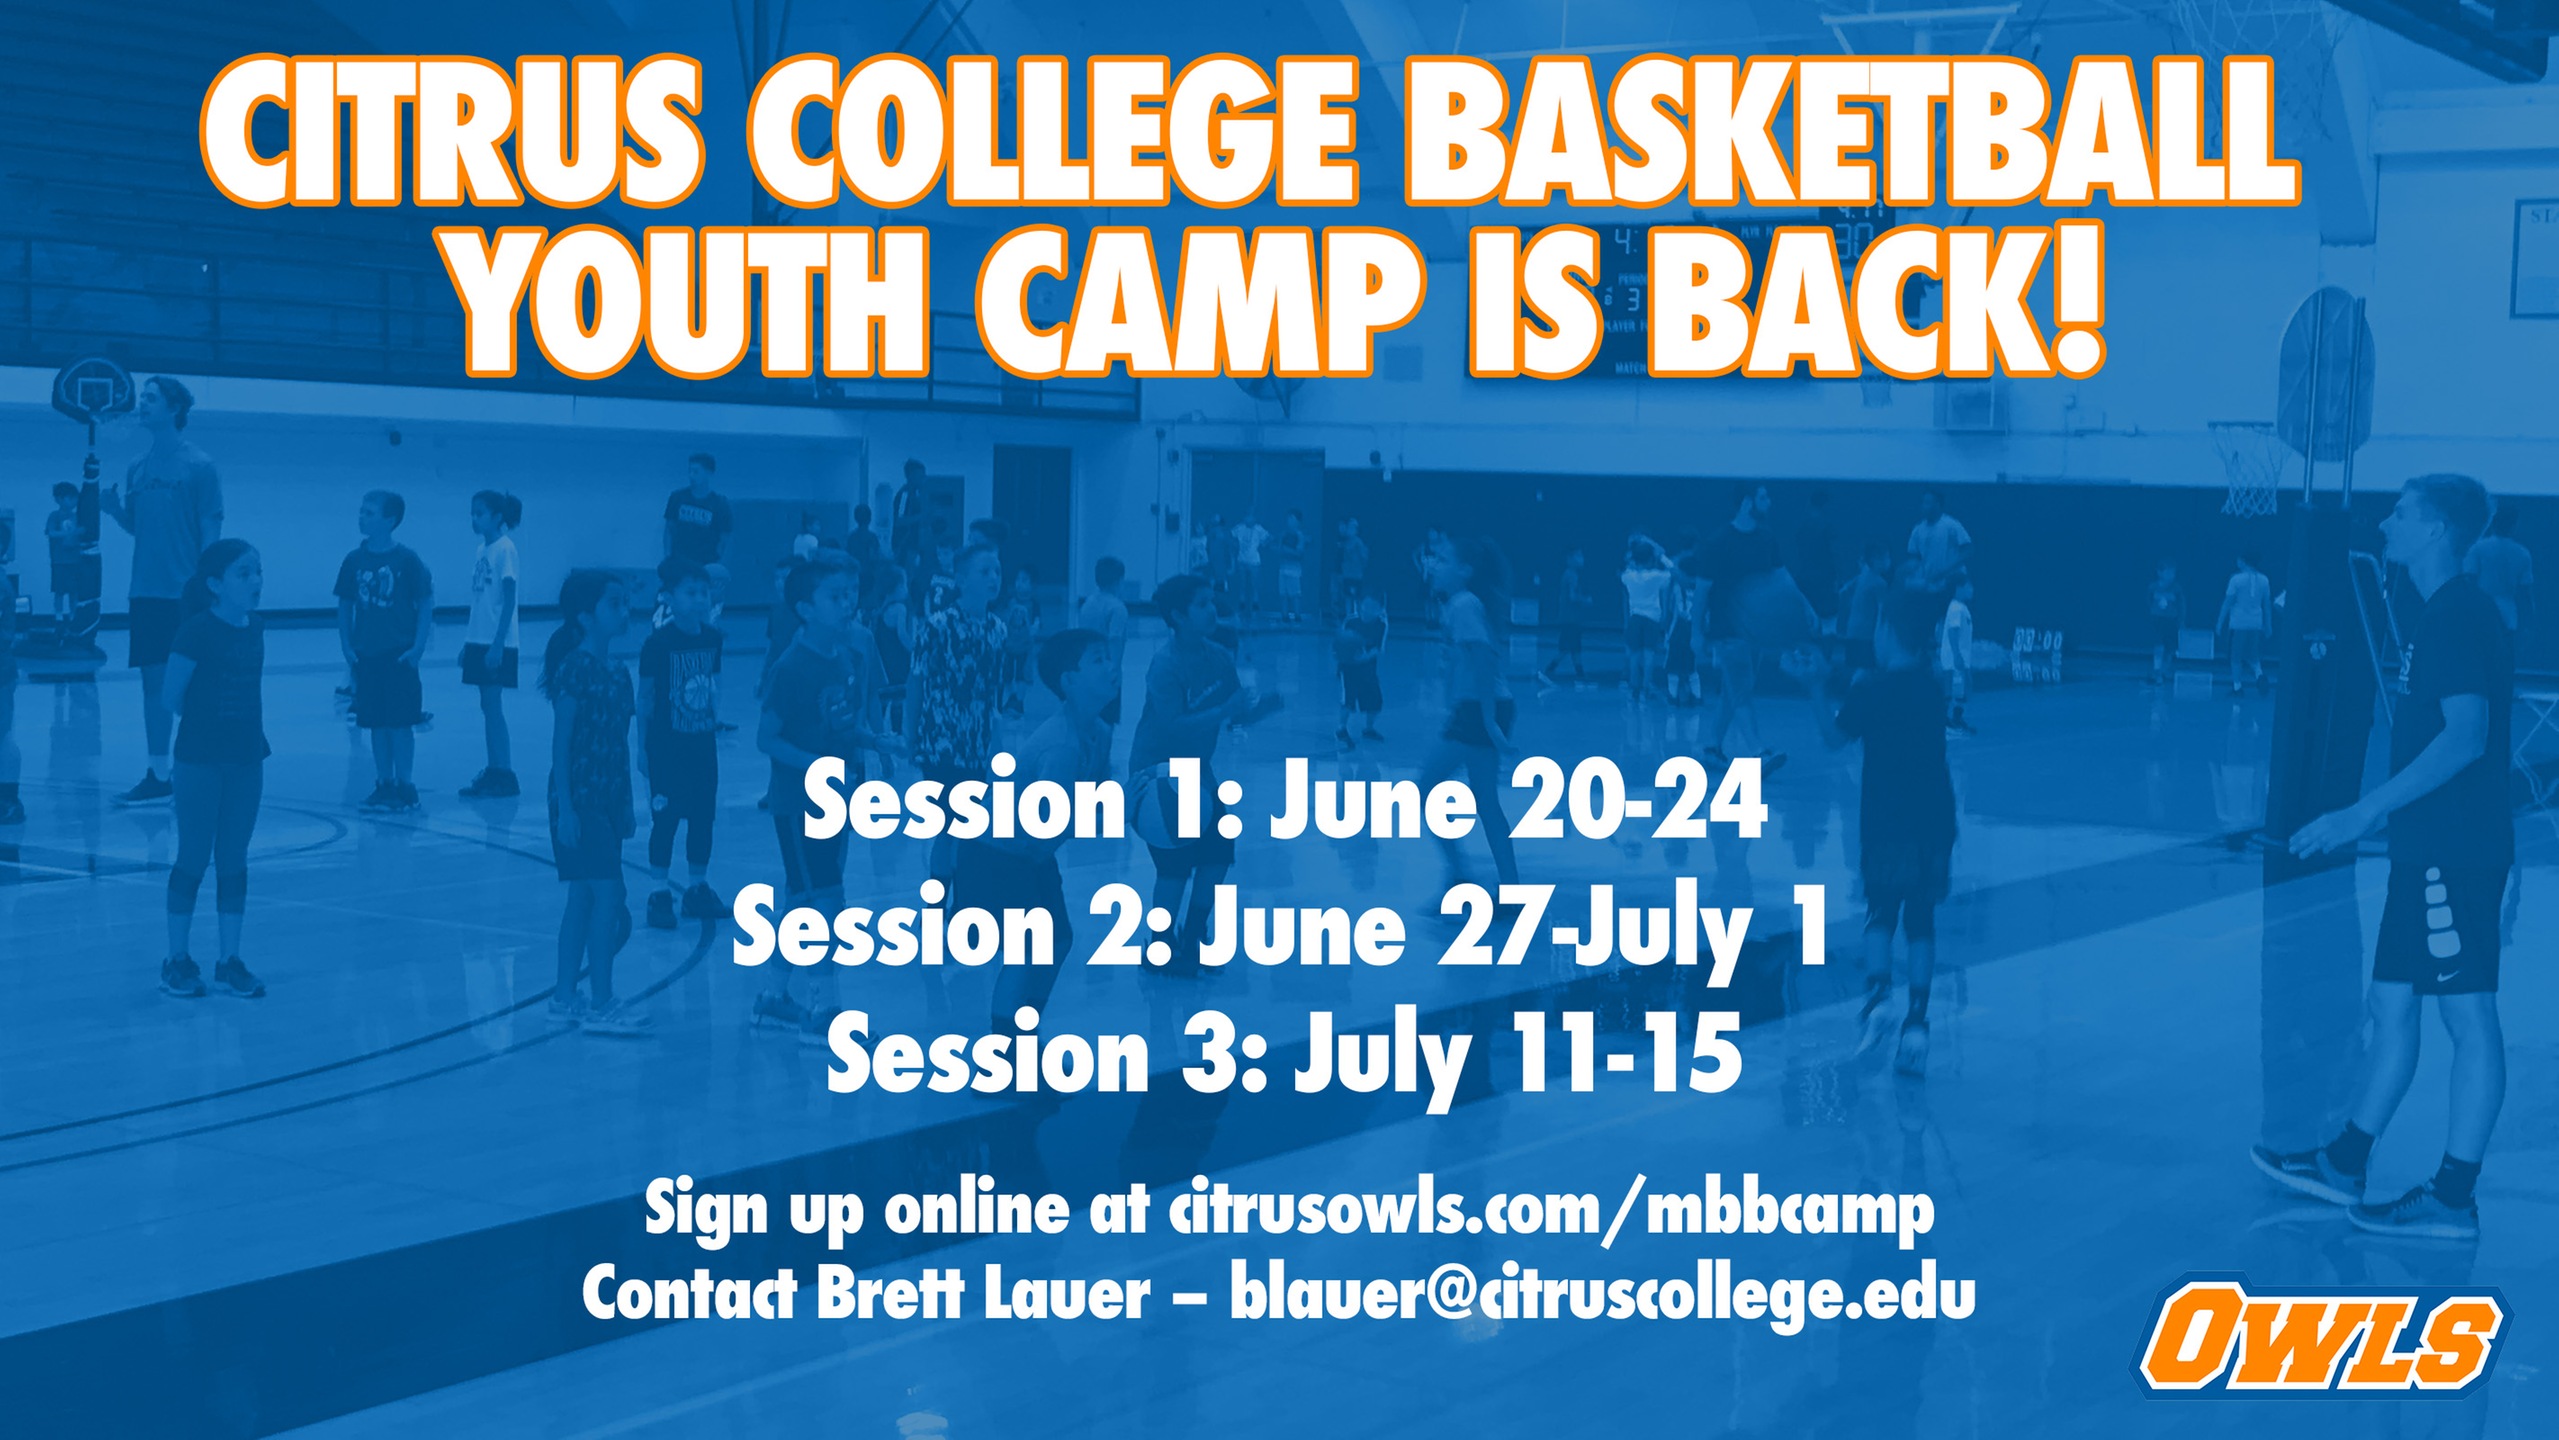 Citrus Men's Basketball Youth Summer Camp is Back